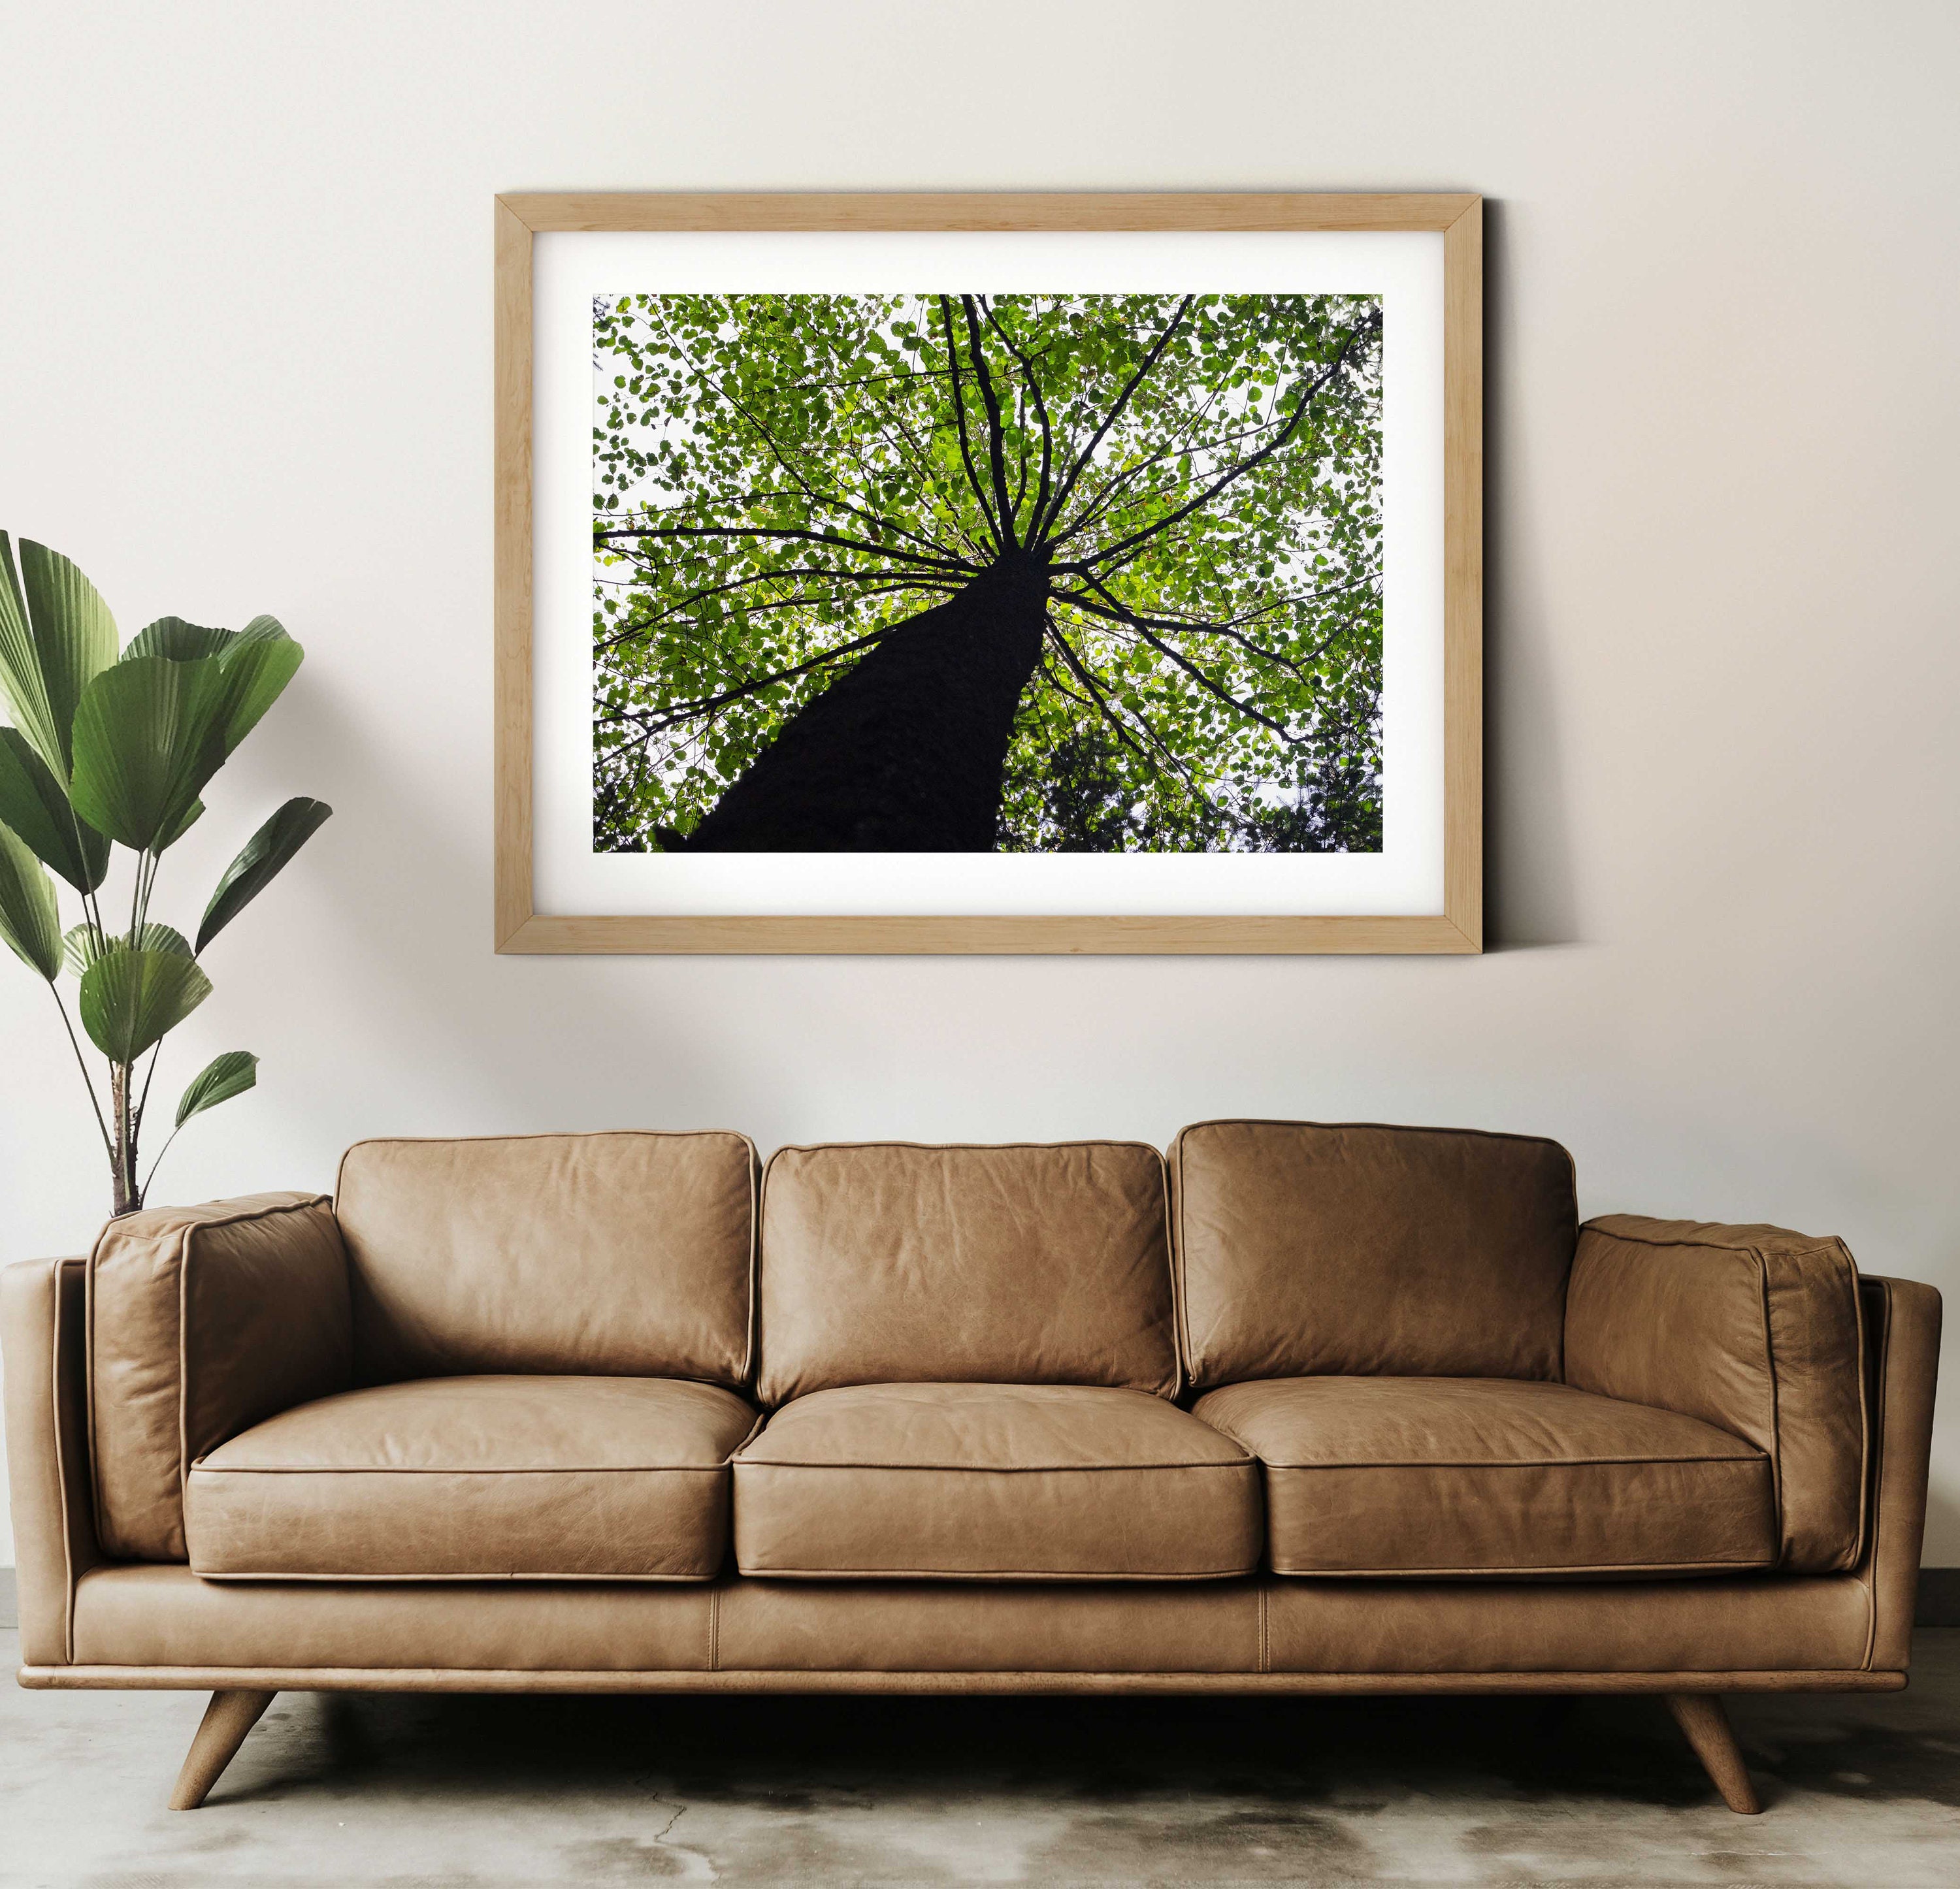 Looking up at Leafy Canopy, Nature Photography, INSTANT DOWNLOAD ...